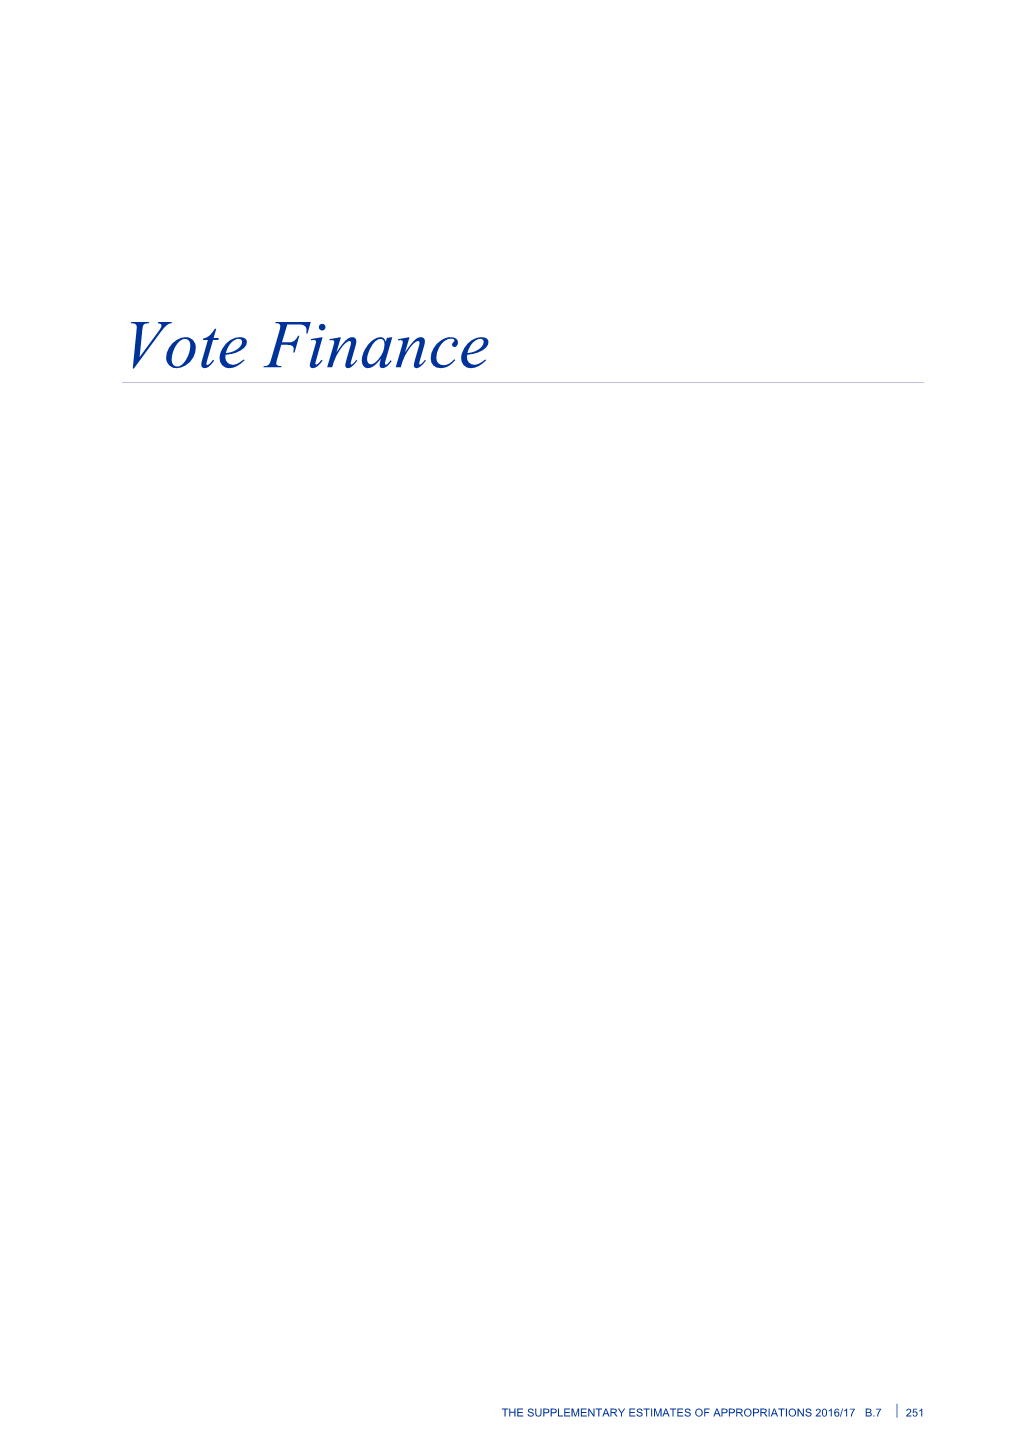 Vote Finance - Supplementary Estimates of Appropriations 2016/17 - Budget 2017